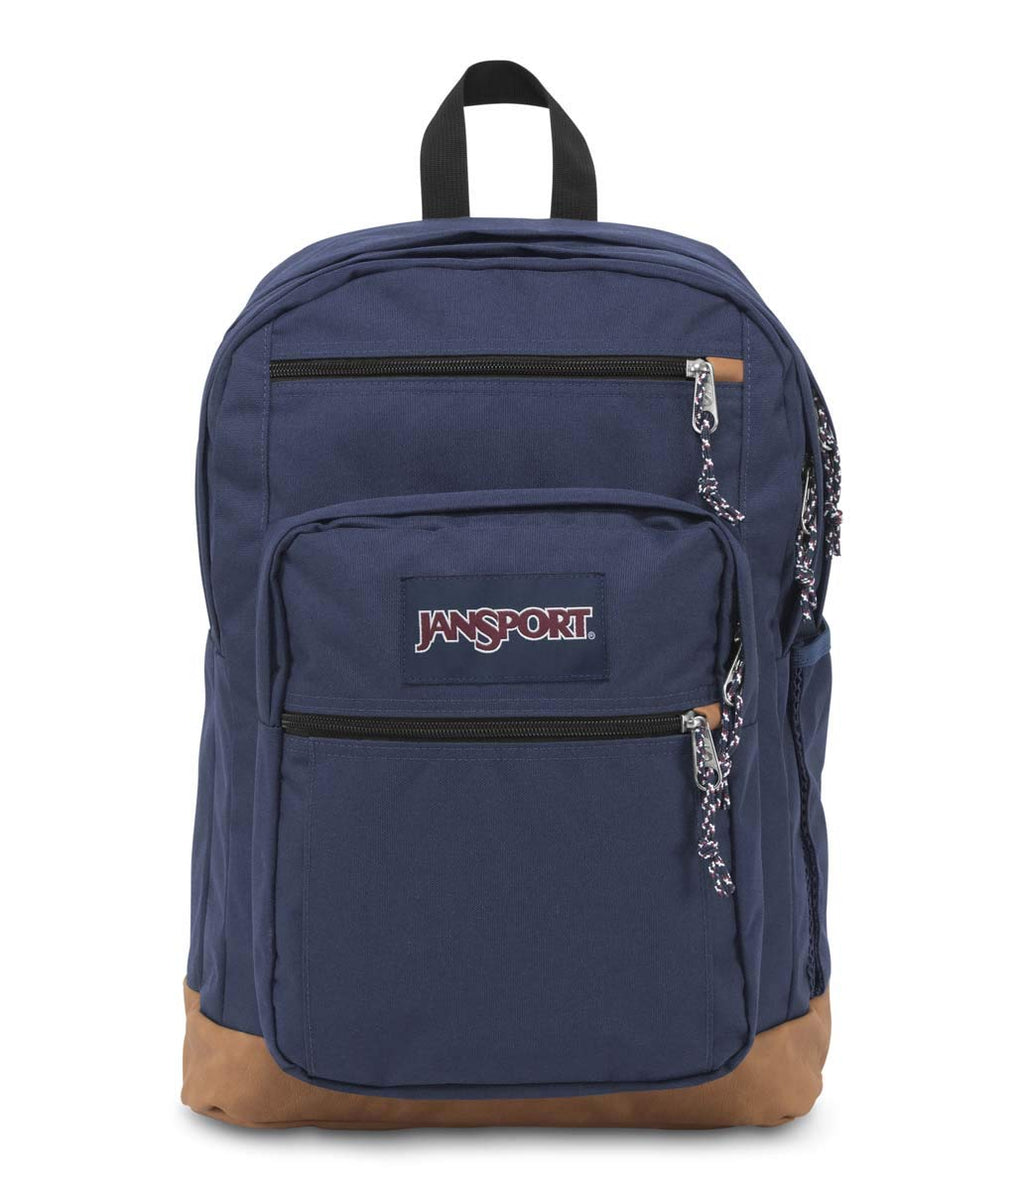 JanSport Backpack with 15-inch Laptop Sleeve, Navy - Large Computer Bag Rucksack with 2 Compartments, Ergonomic Straps - Bag for Men, Women One Size